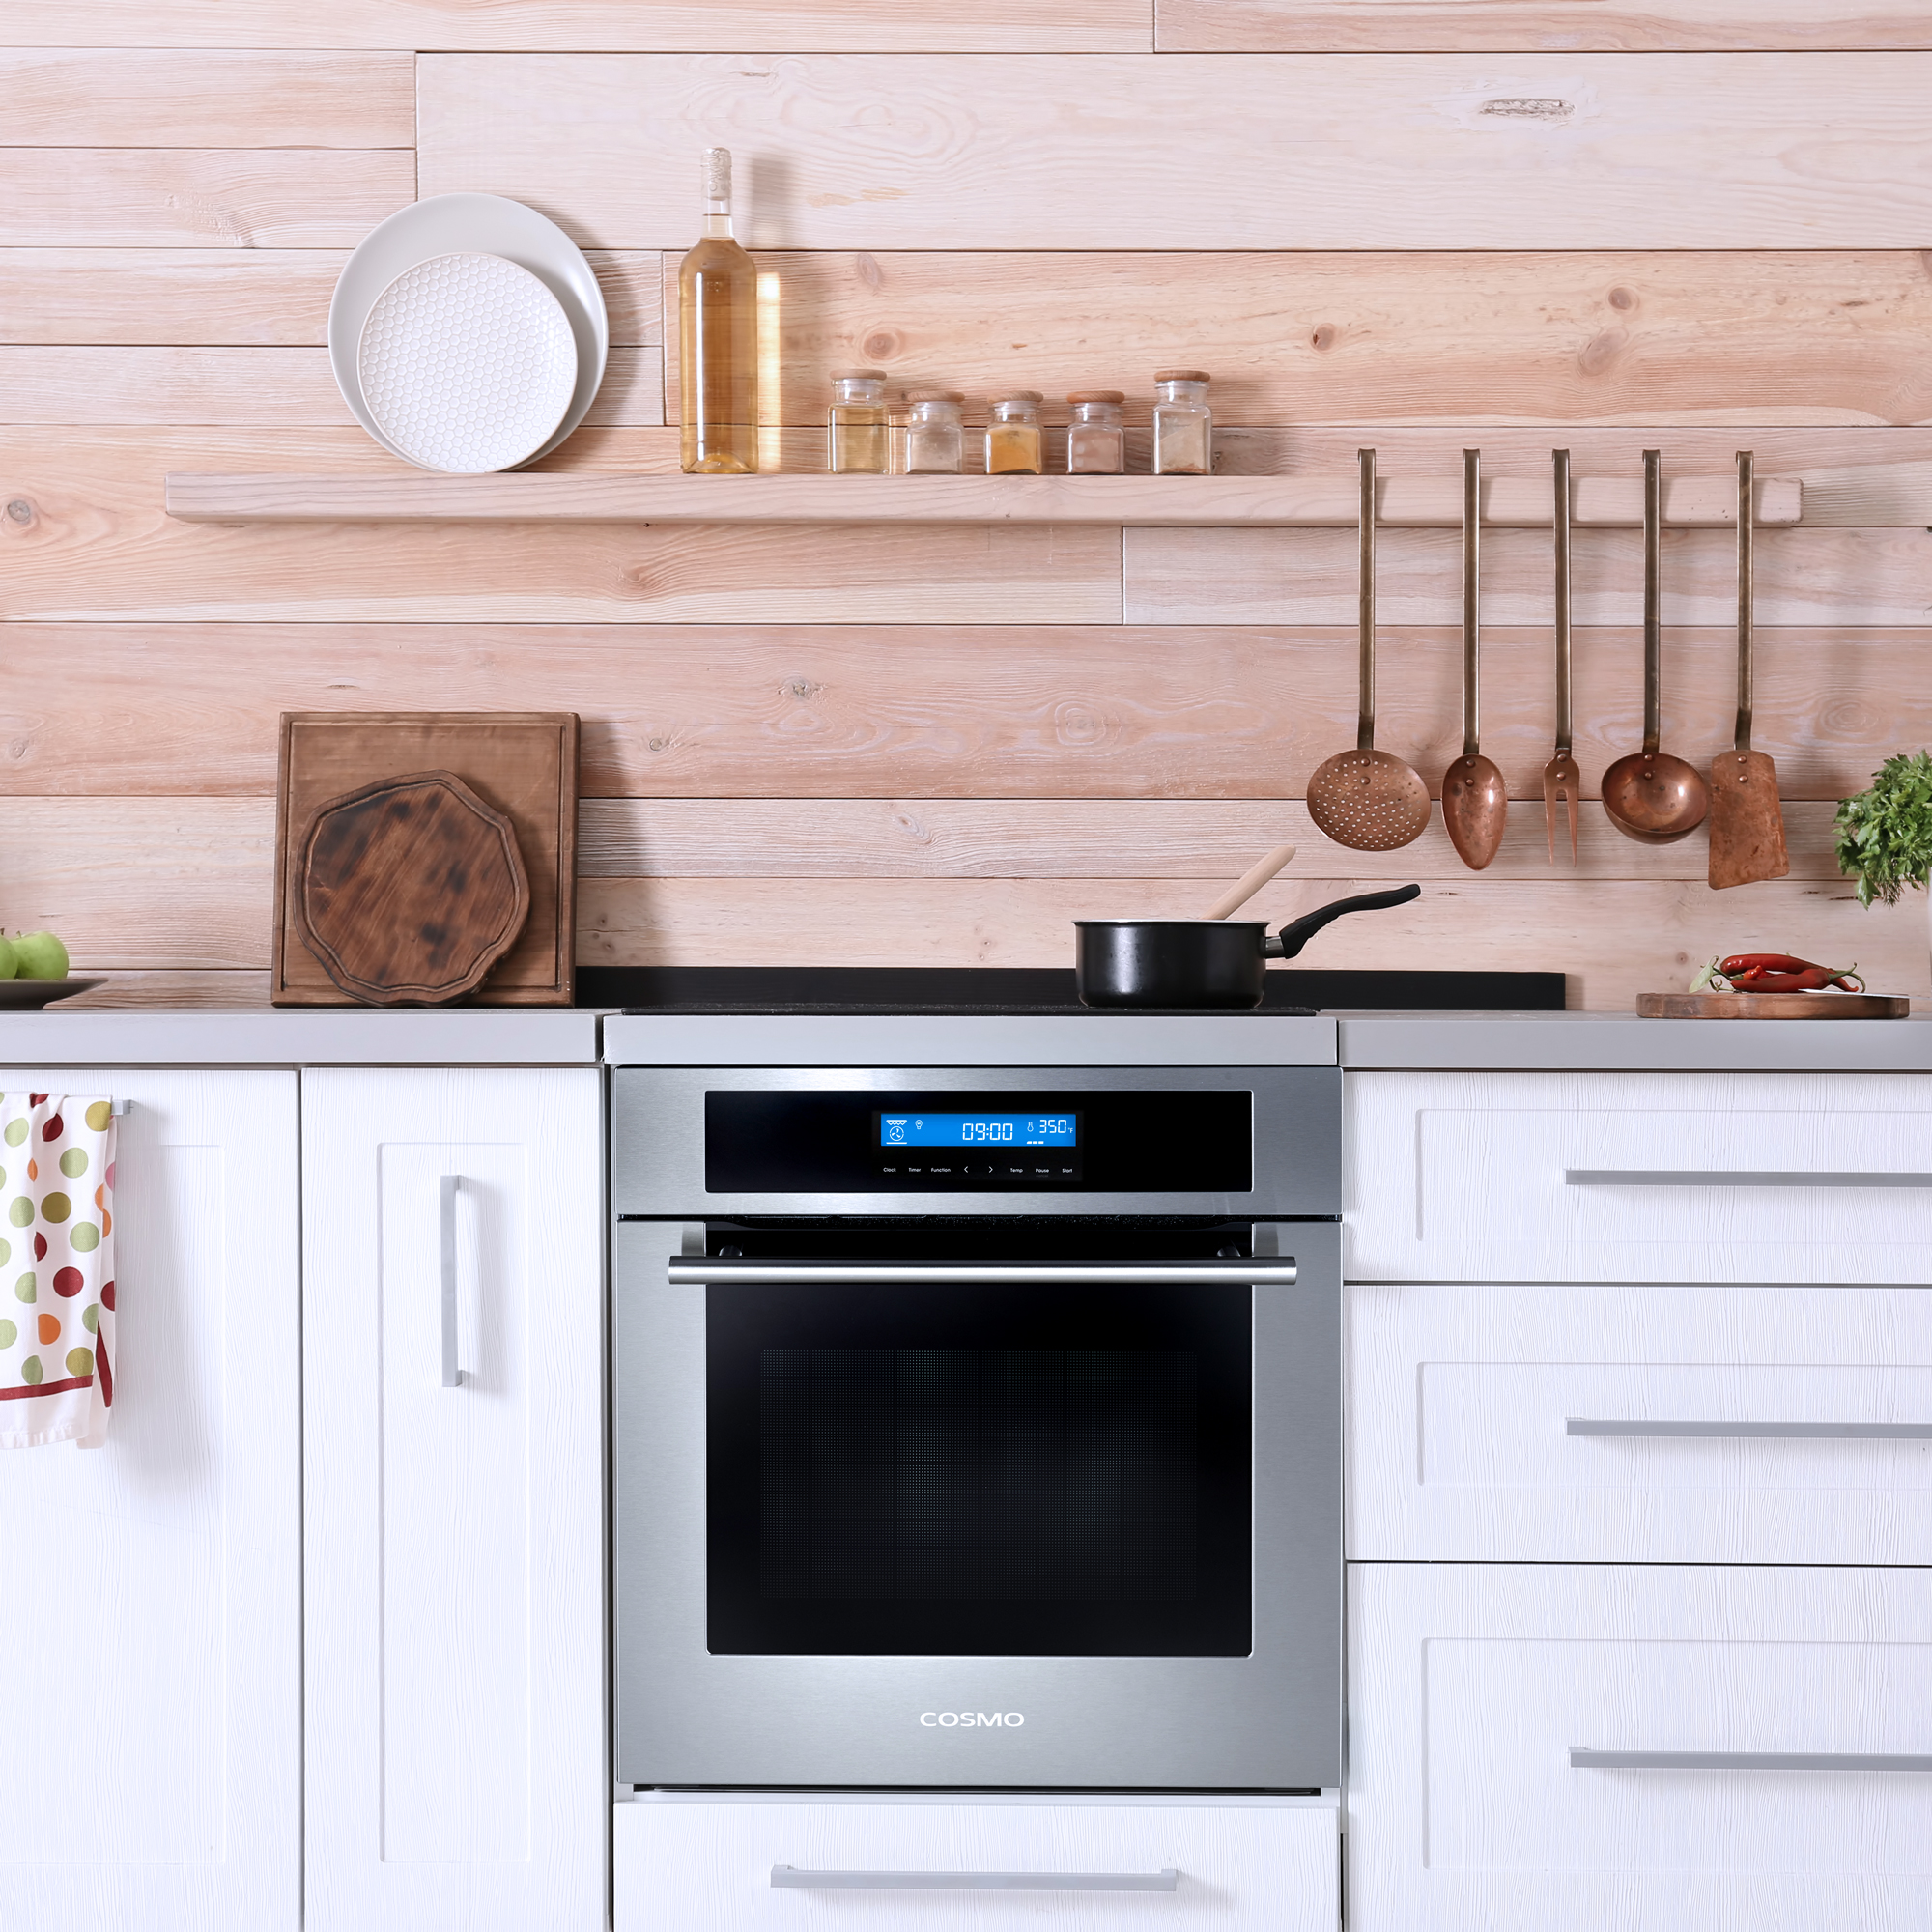 Everything You Should Know About Replacing Appliances